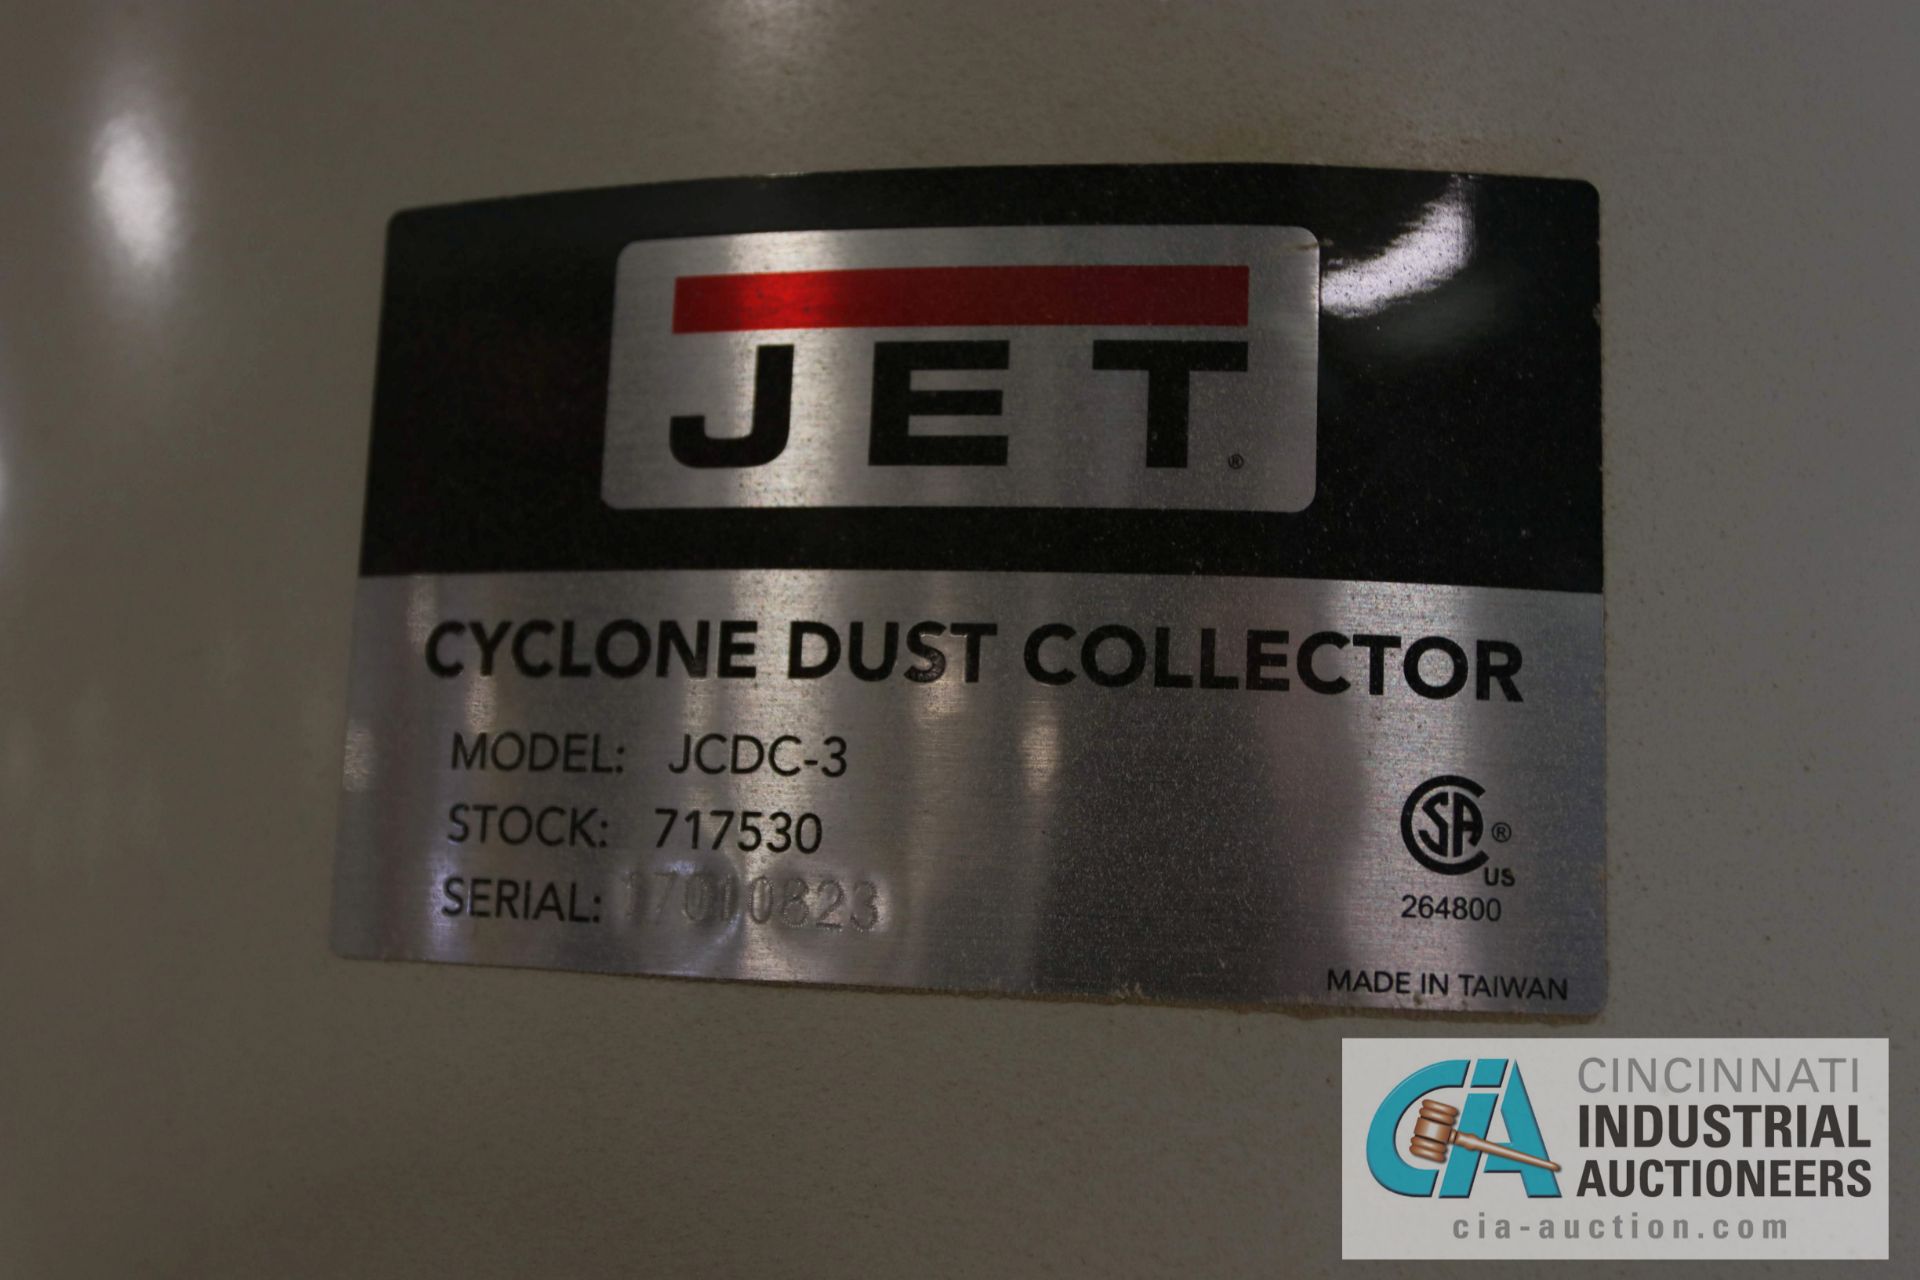 3 HP JET MODEL JCDC-3 DUST COLLECTOR; STOCK #717530, S/N 17010823 - $20.00 Rigging Fee Due to Onsite - Image 3 of 3